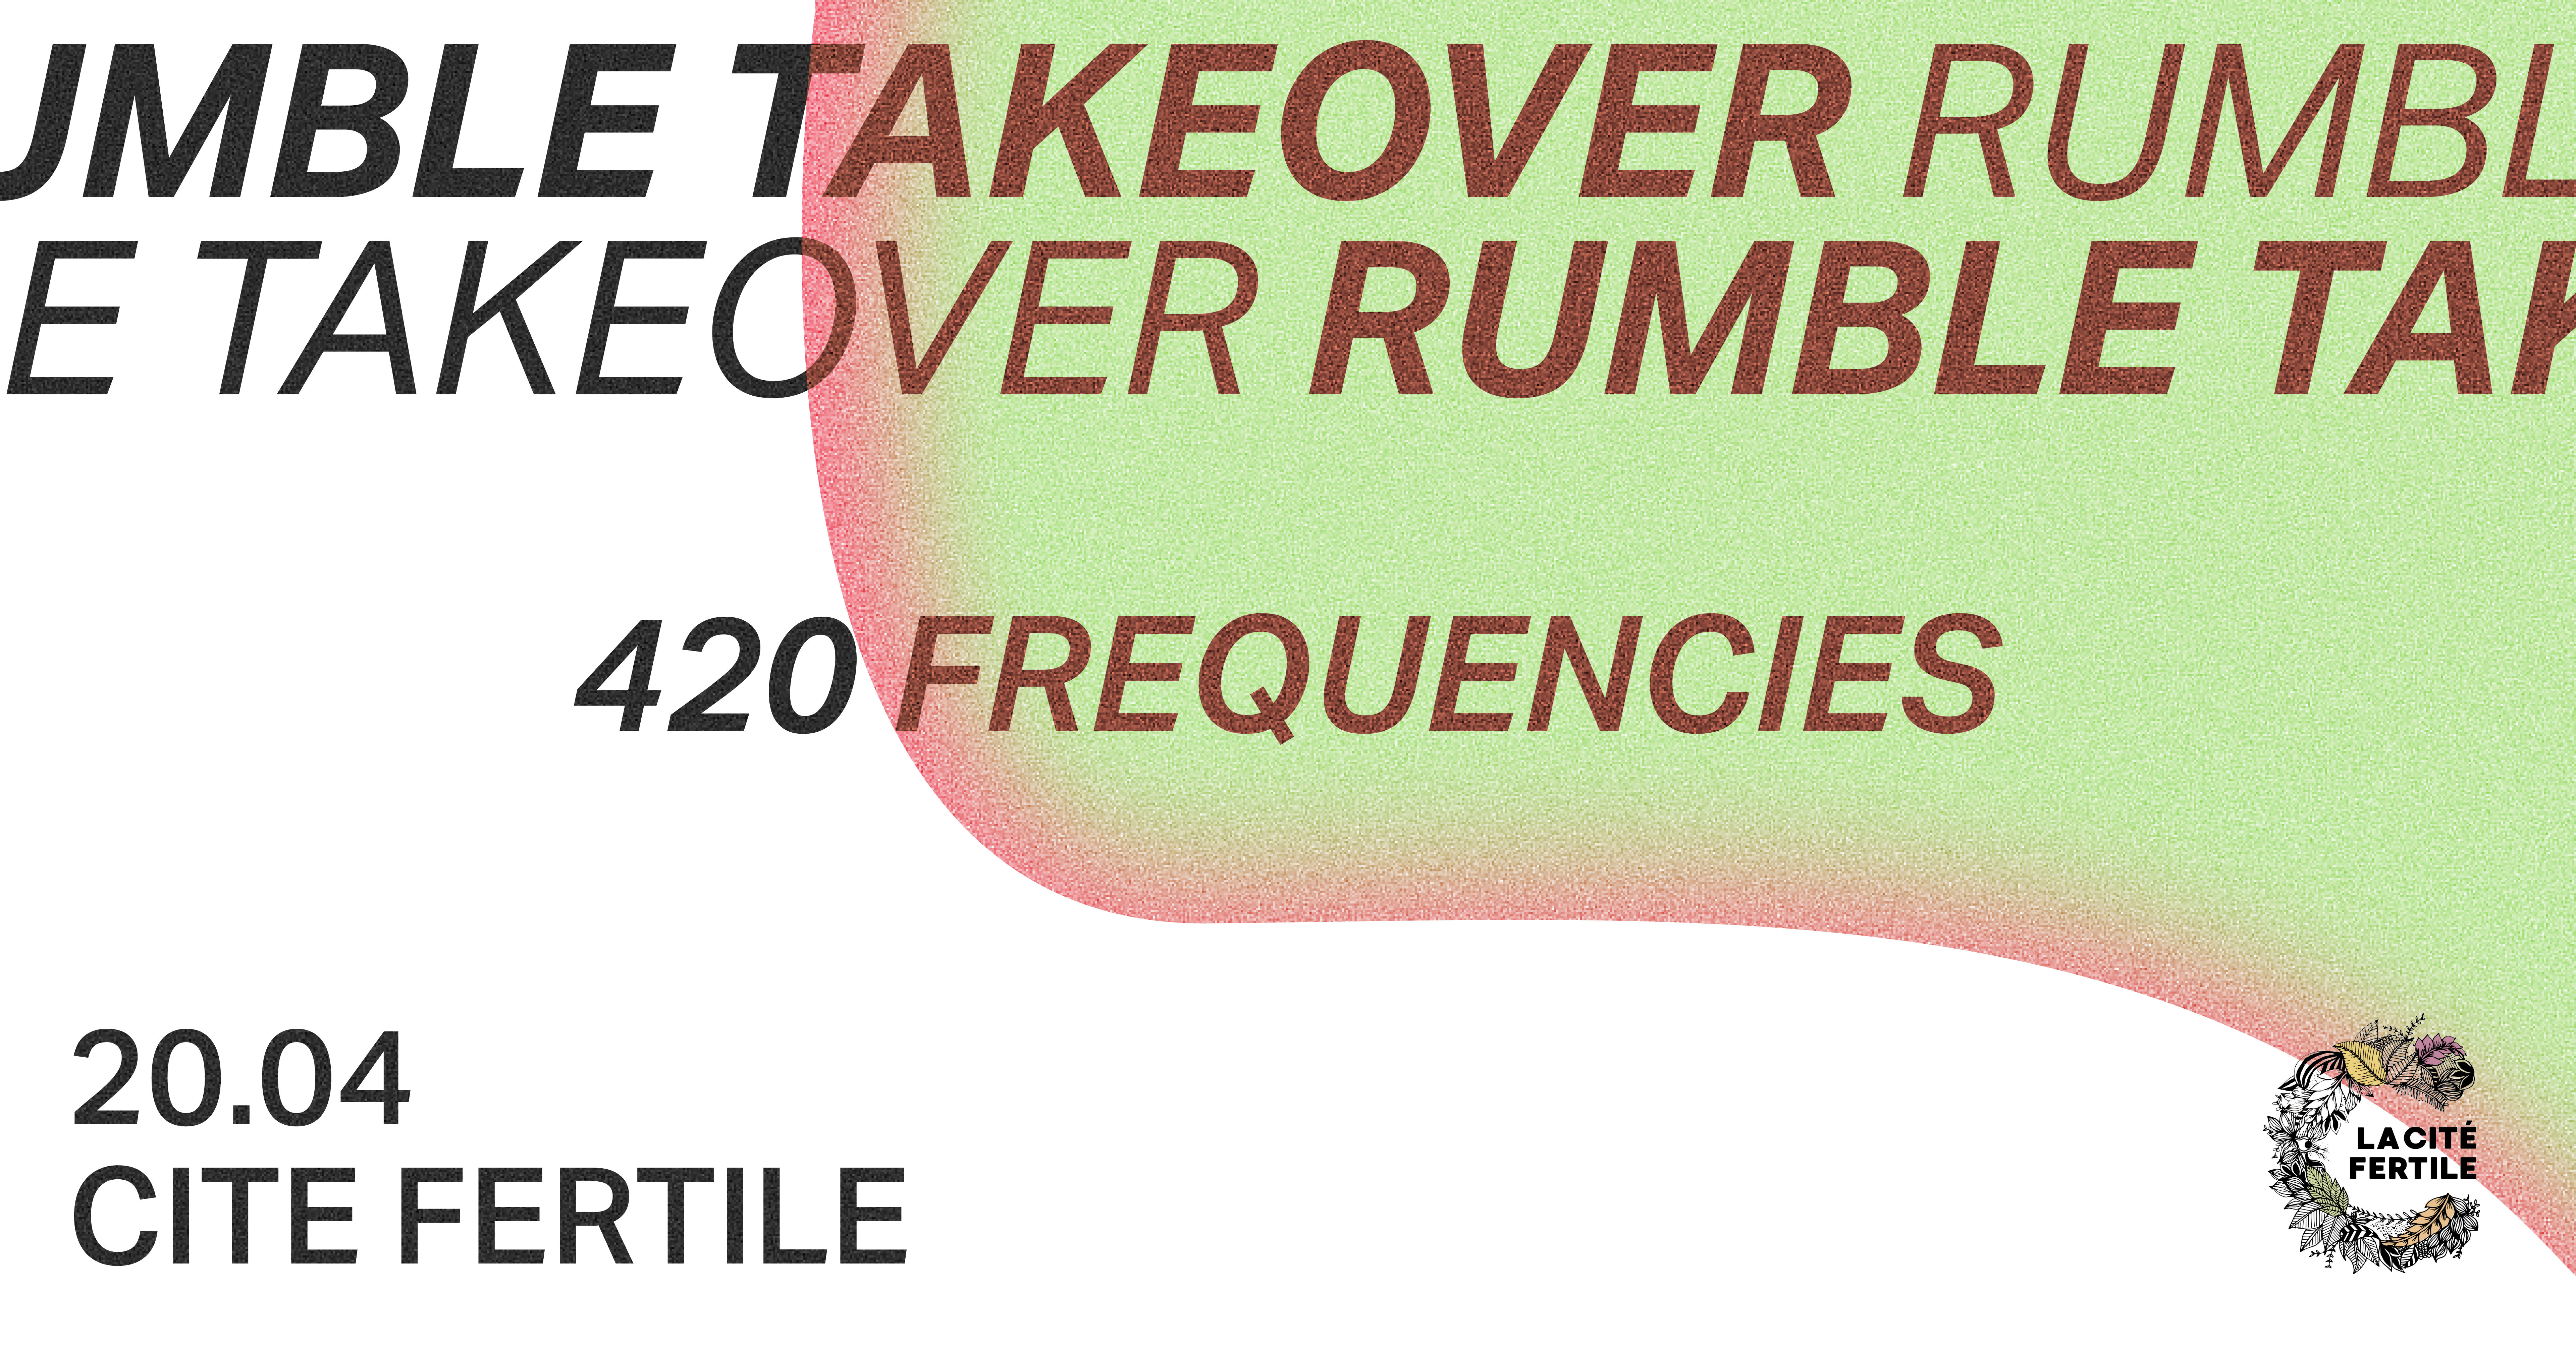 RUMBLE TAKEOVER : 420 FREQUENCIES